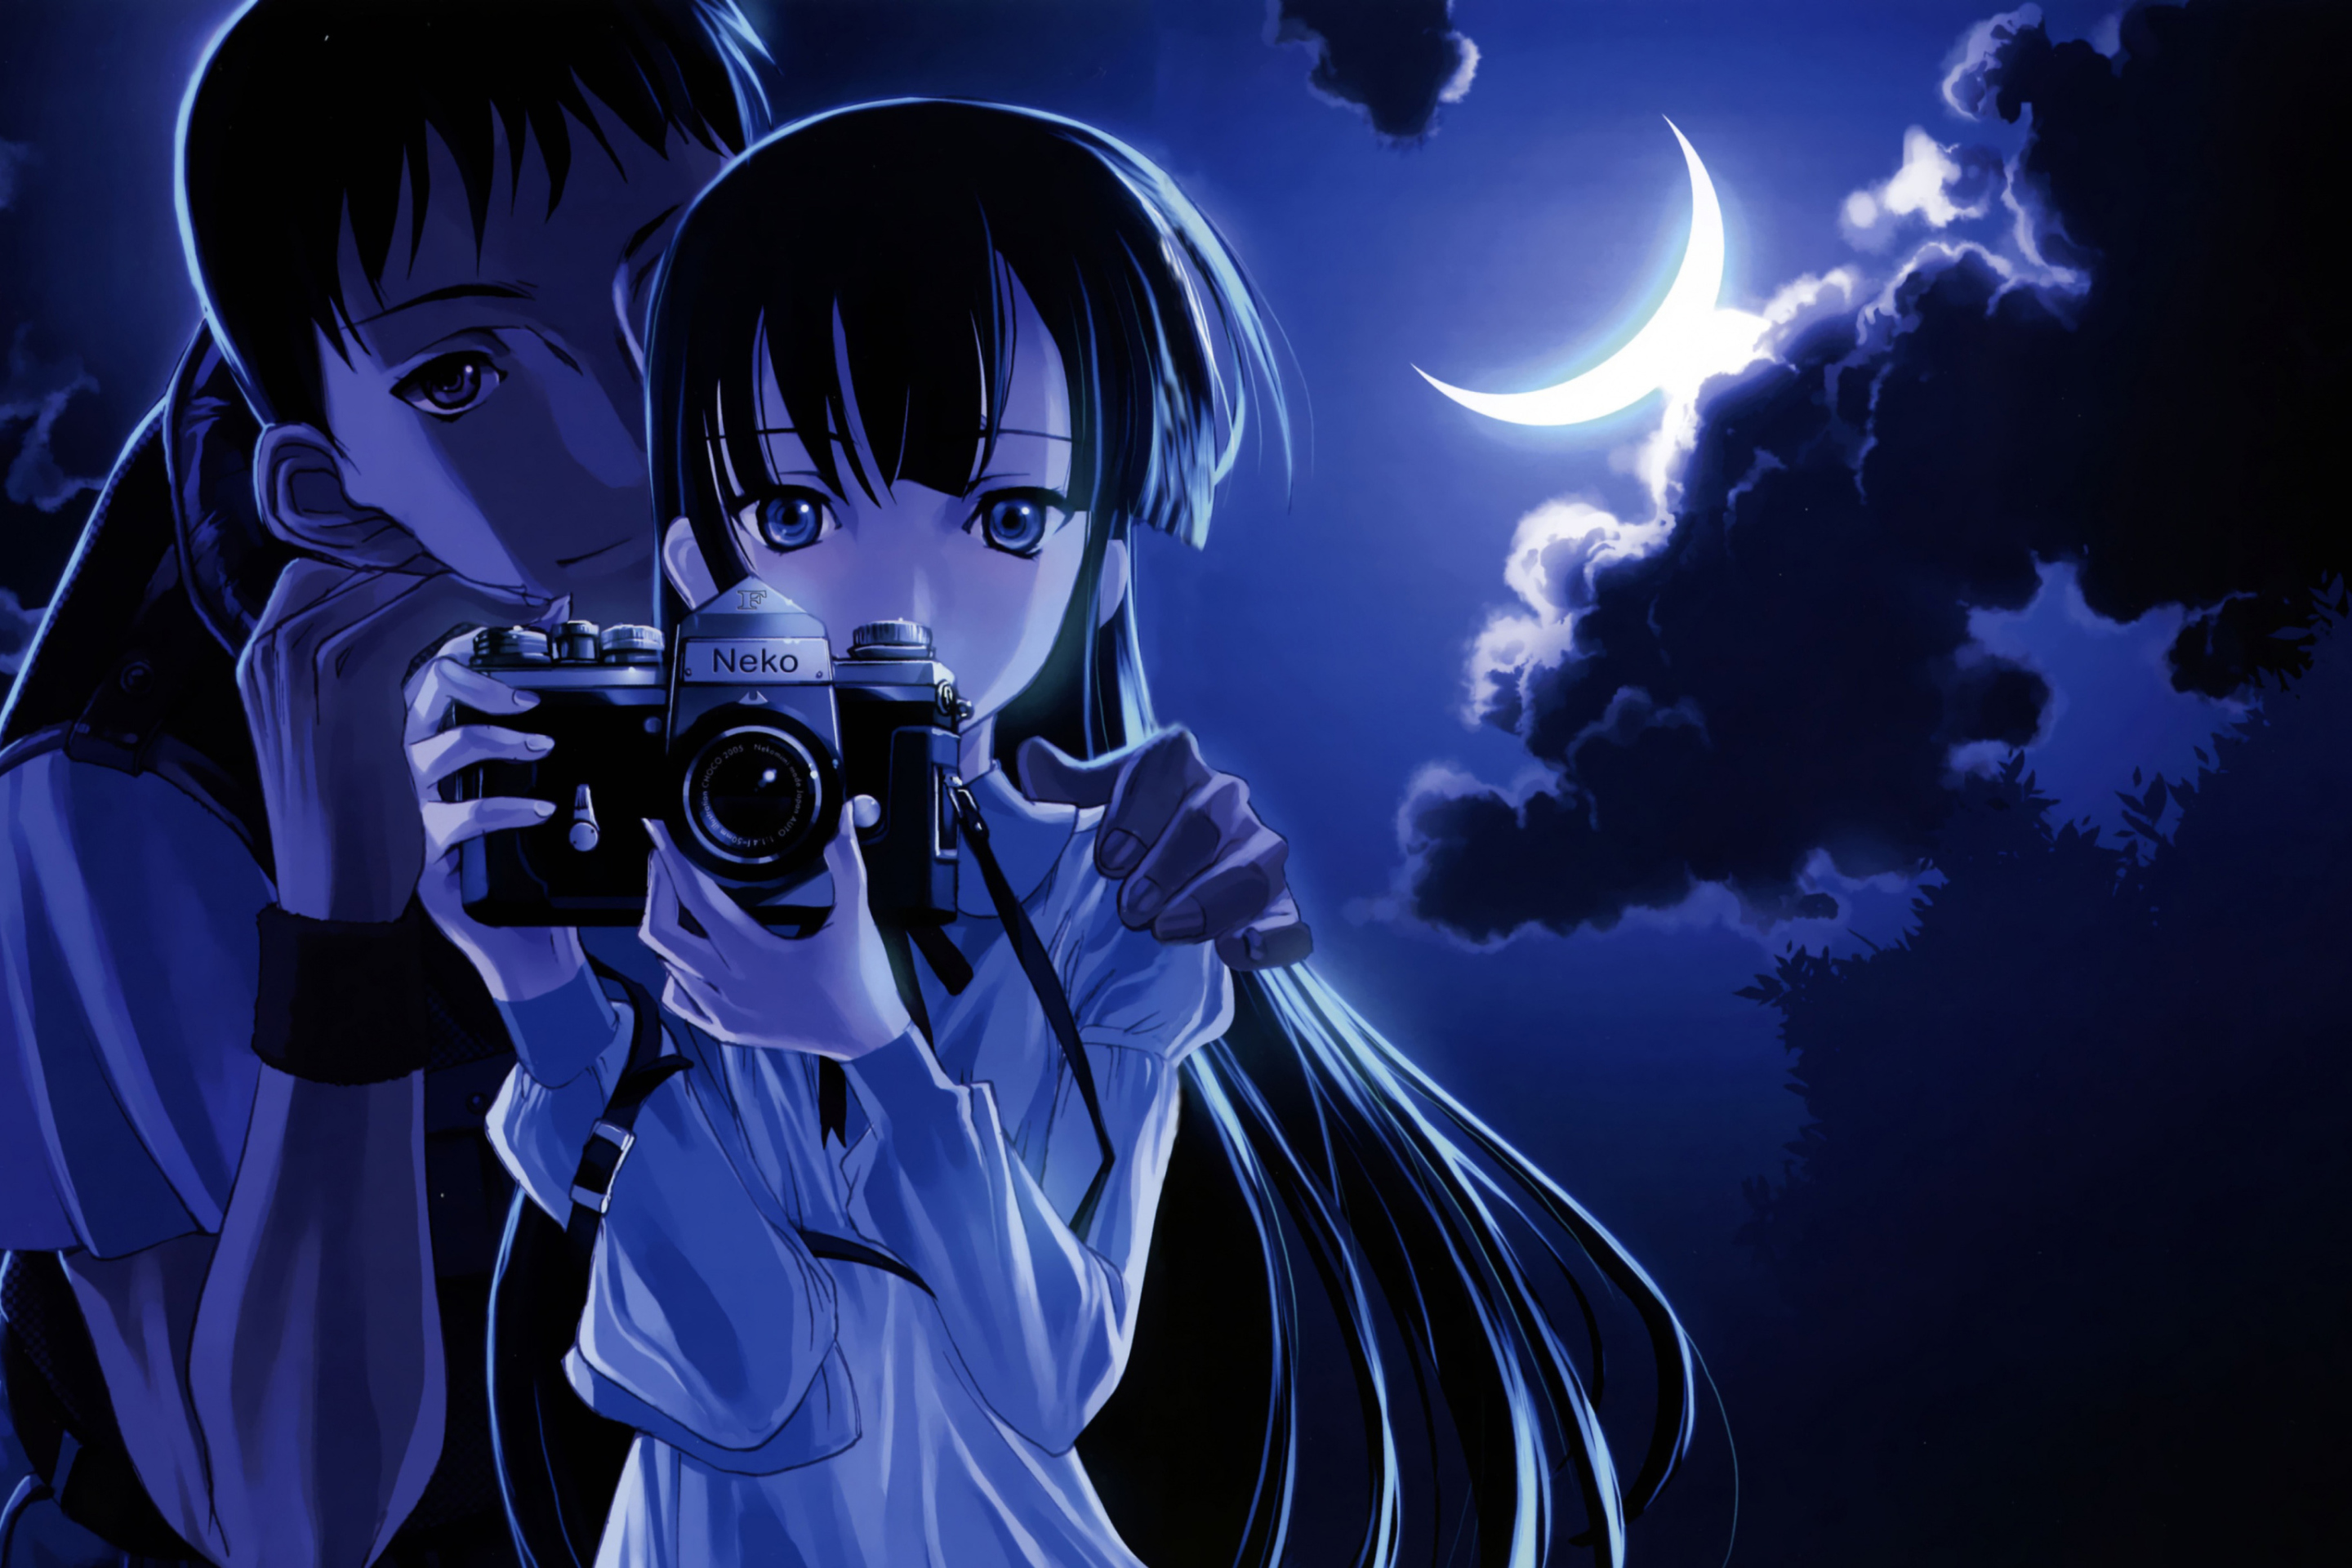 Anime Girl With Vintage Photo Camera wallpaper 2880x1920